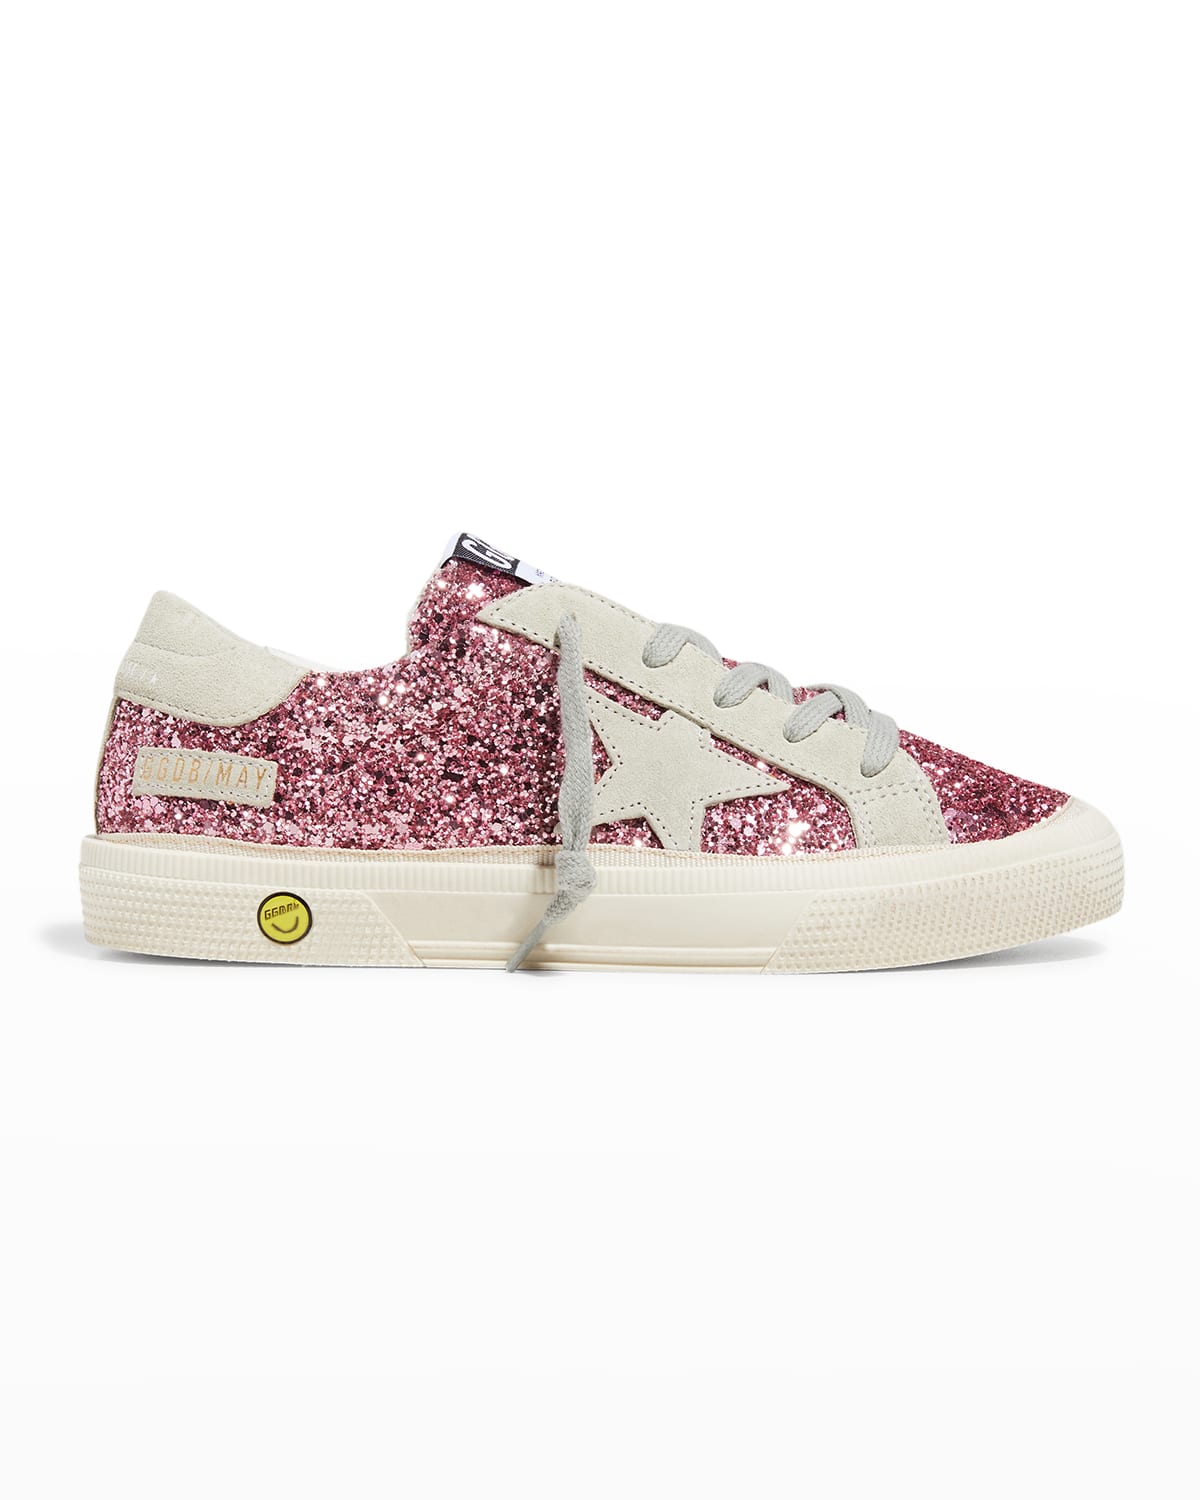 Girl's May Glitter Leather Low-Top Sneakers, Toddler/Kids